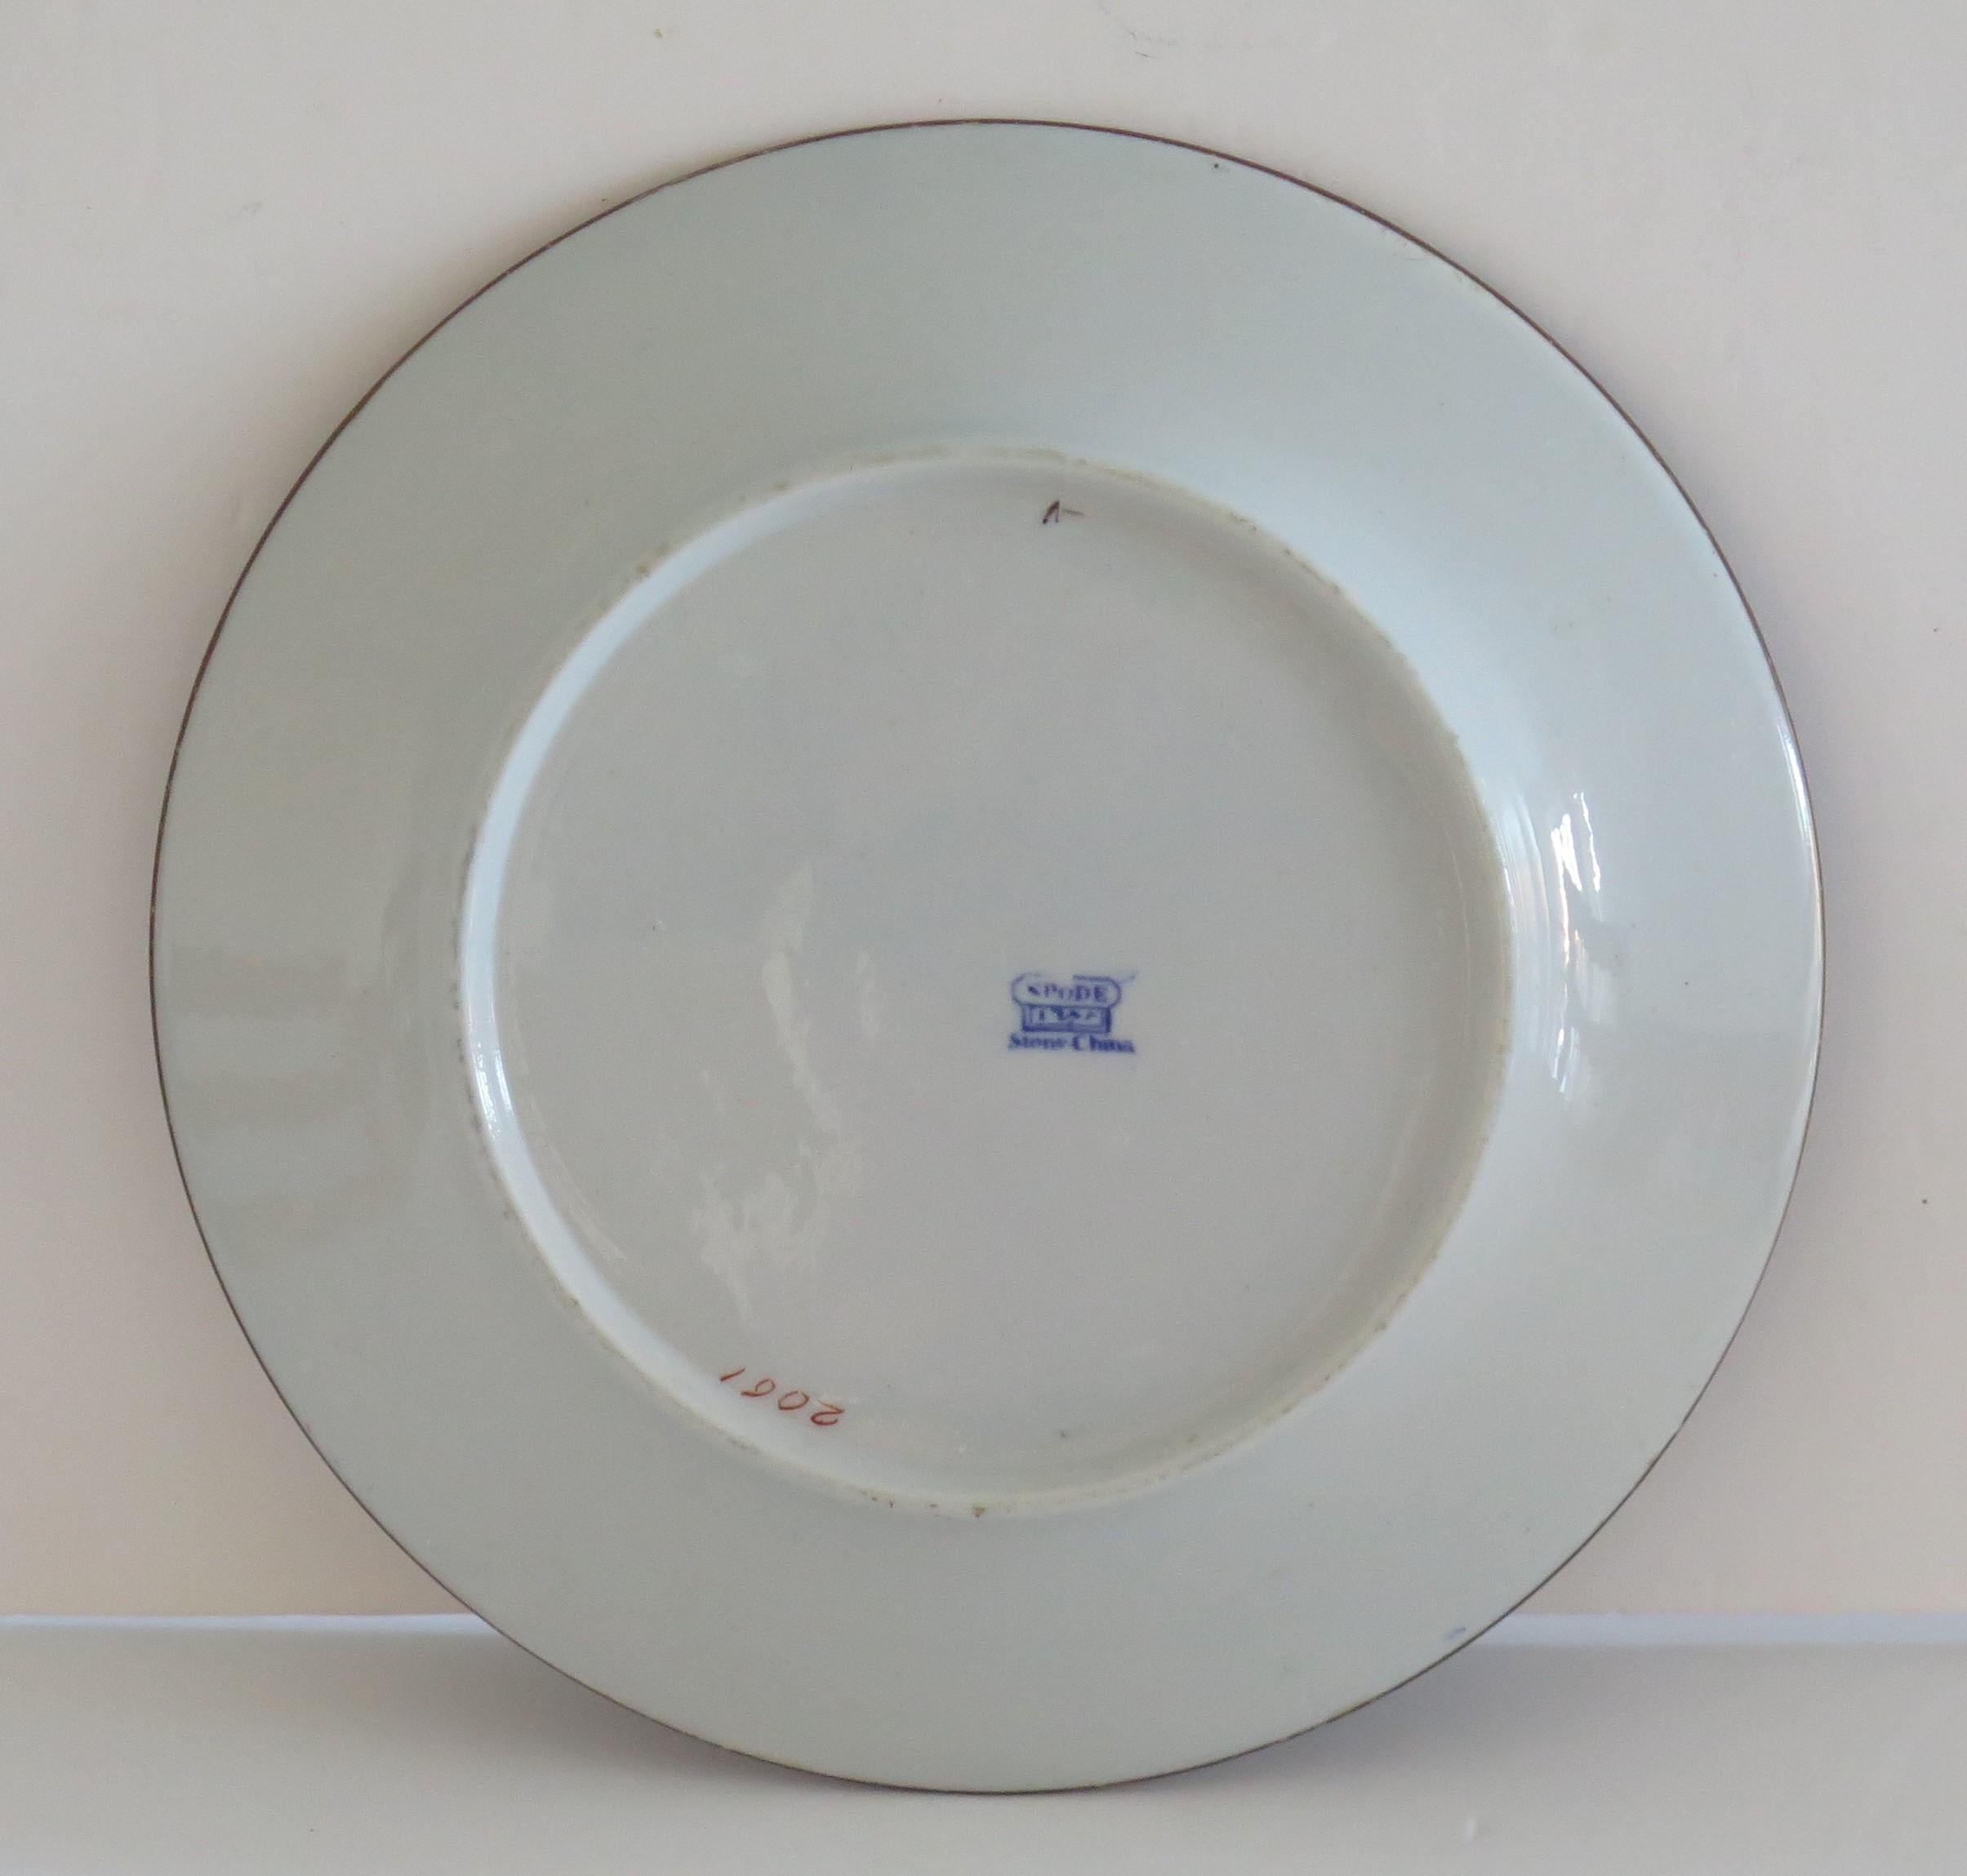 19th Century Georgian Spode Stone China Side Plate or Dish in Tobacco Leaf Pattern No. 2061